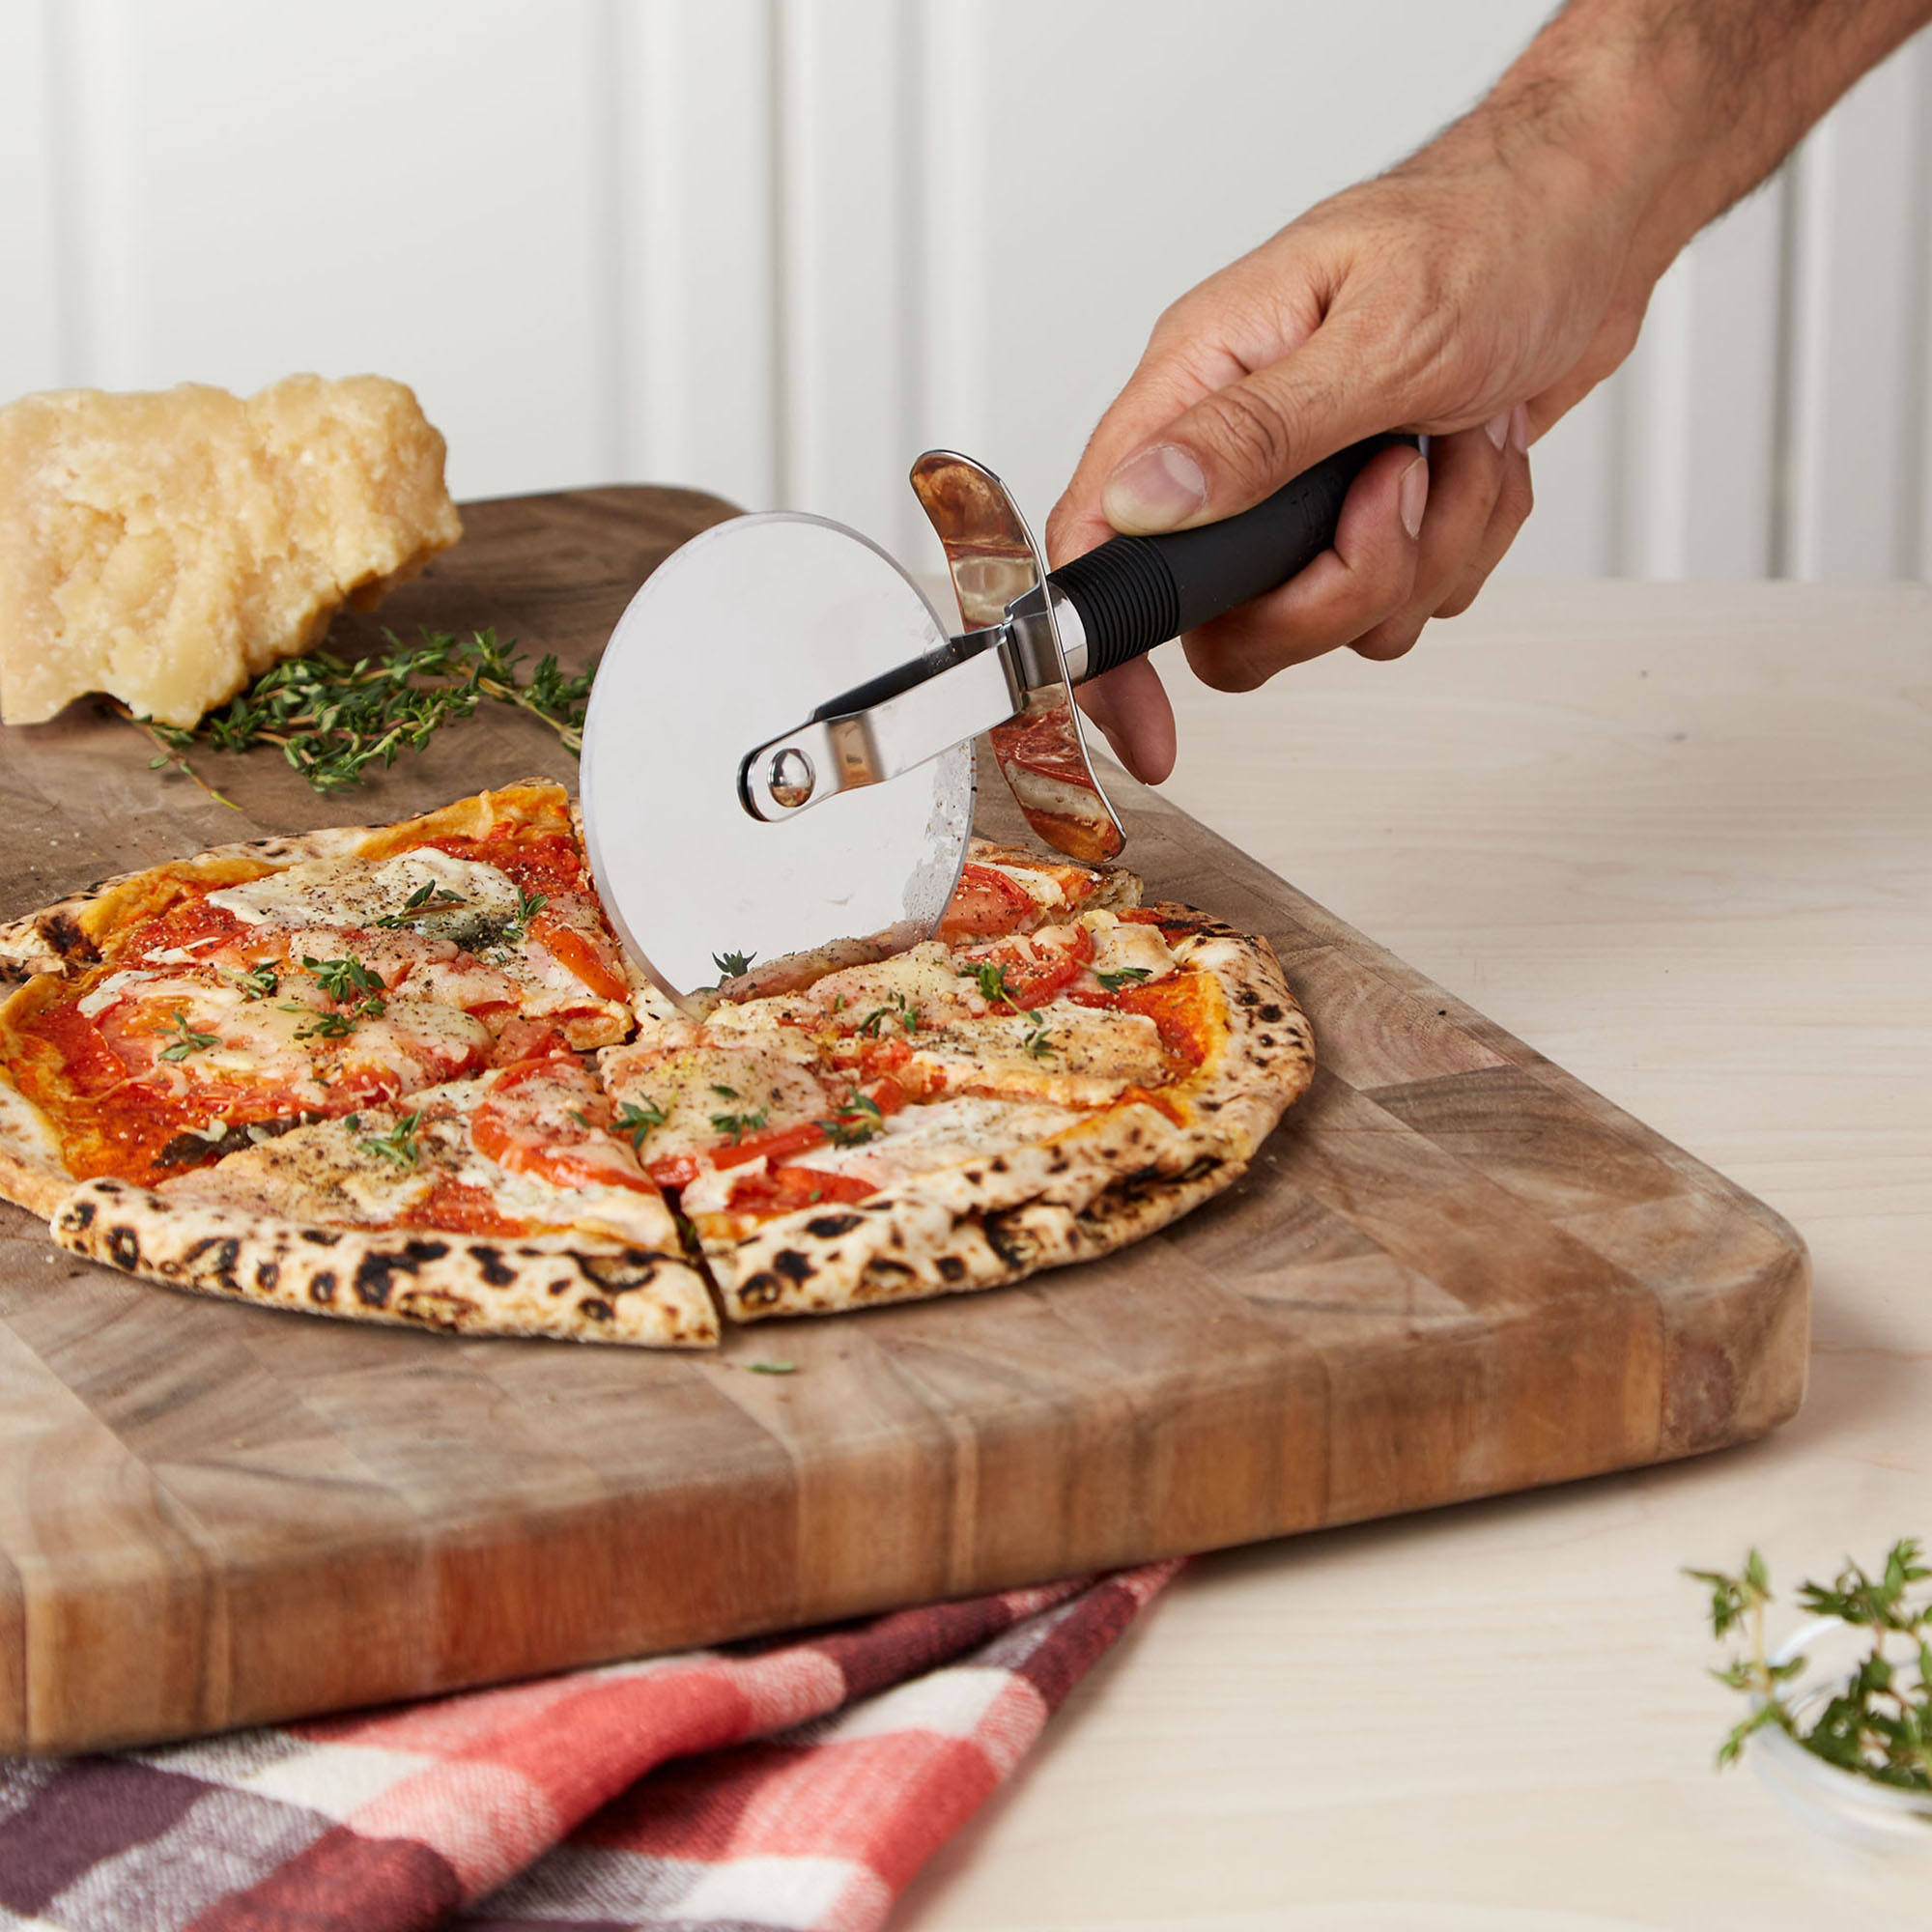 Tasty Classic Wheel Black Pizza Cutter with Soft Grip Handle